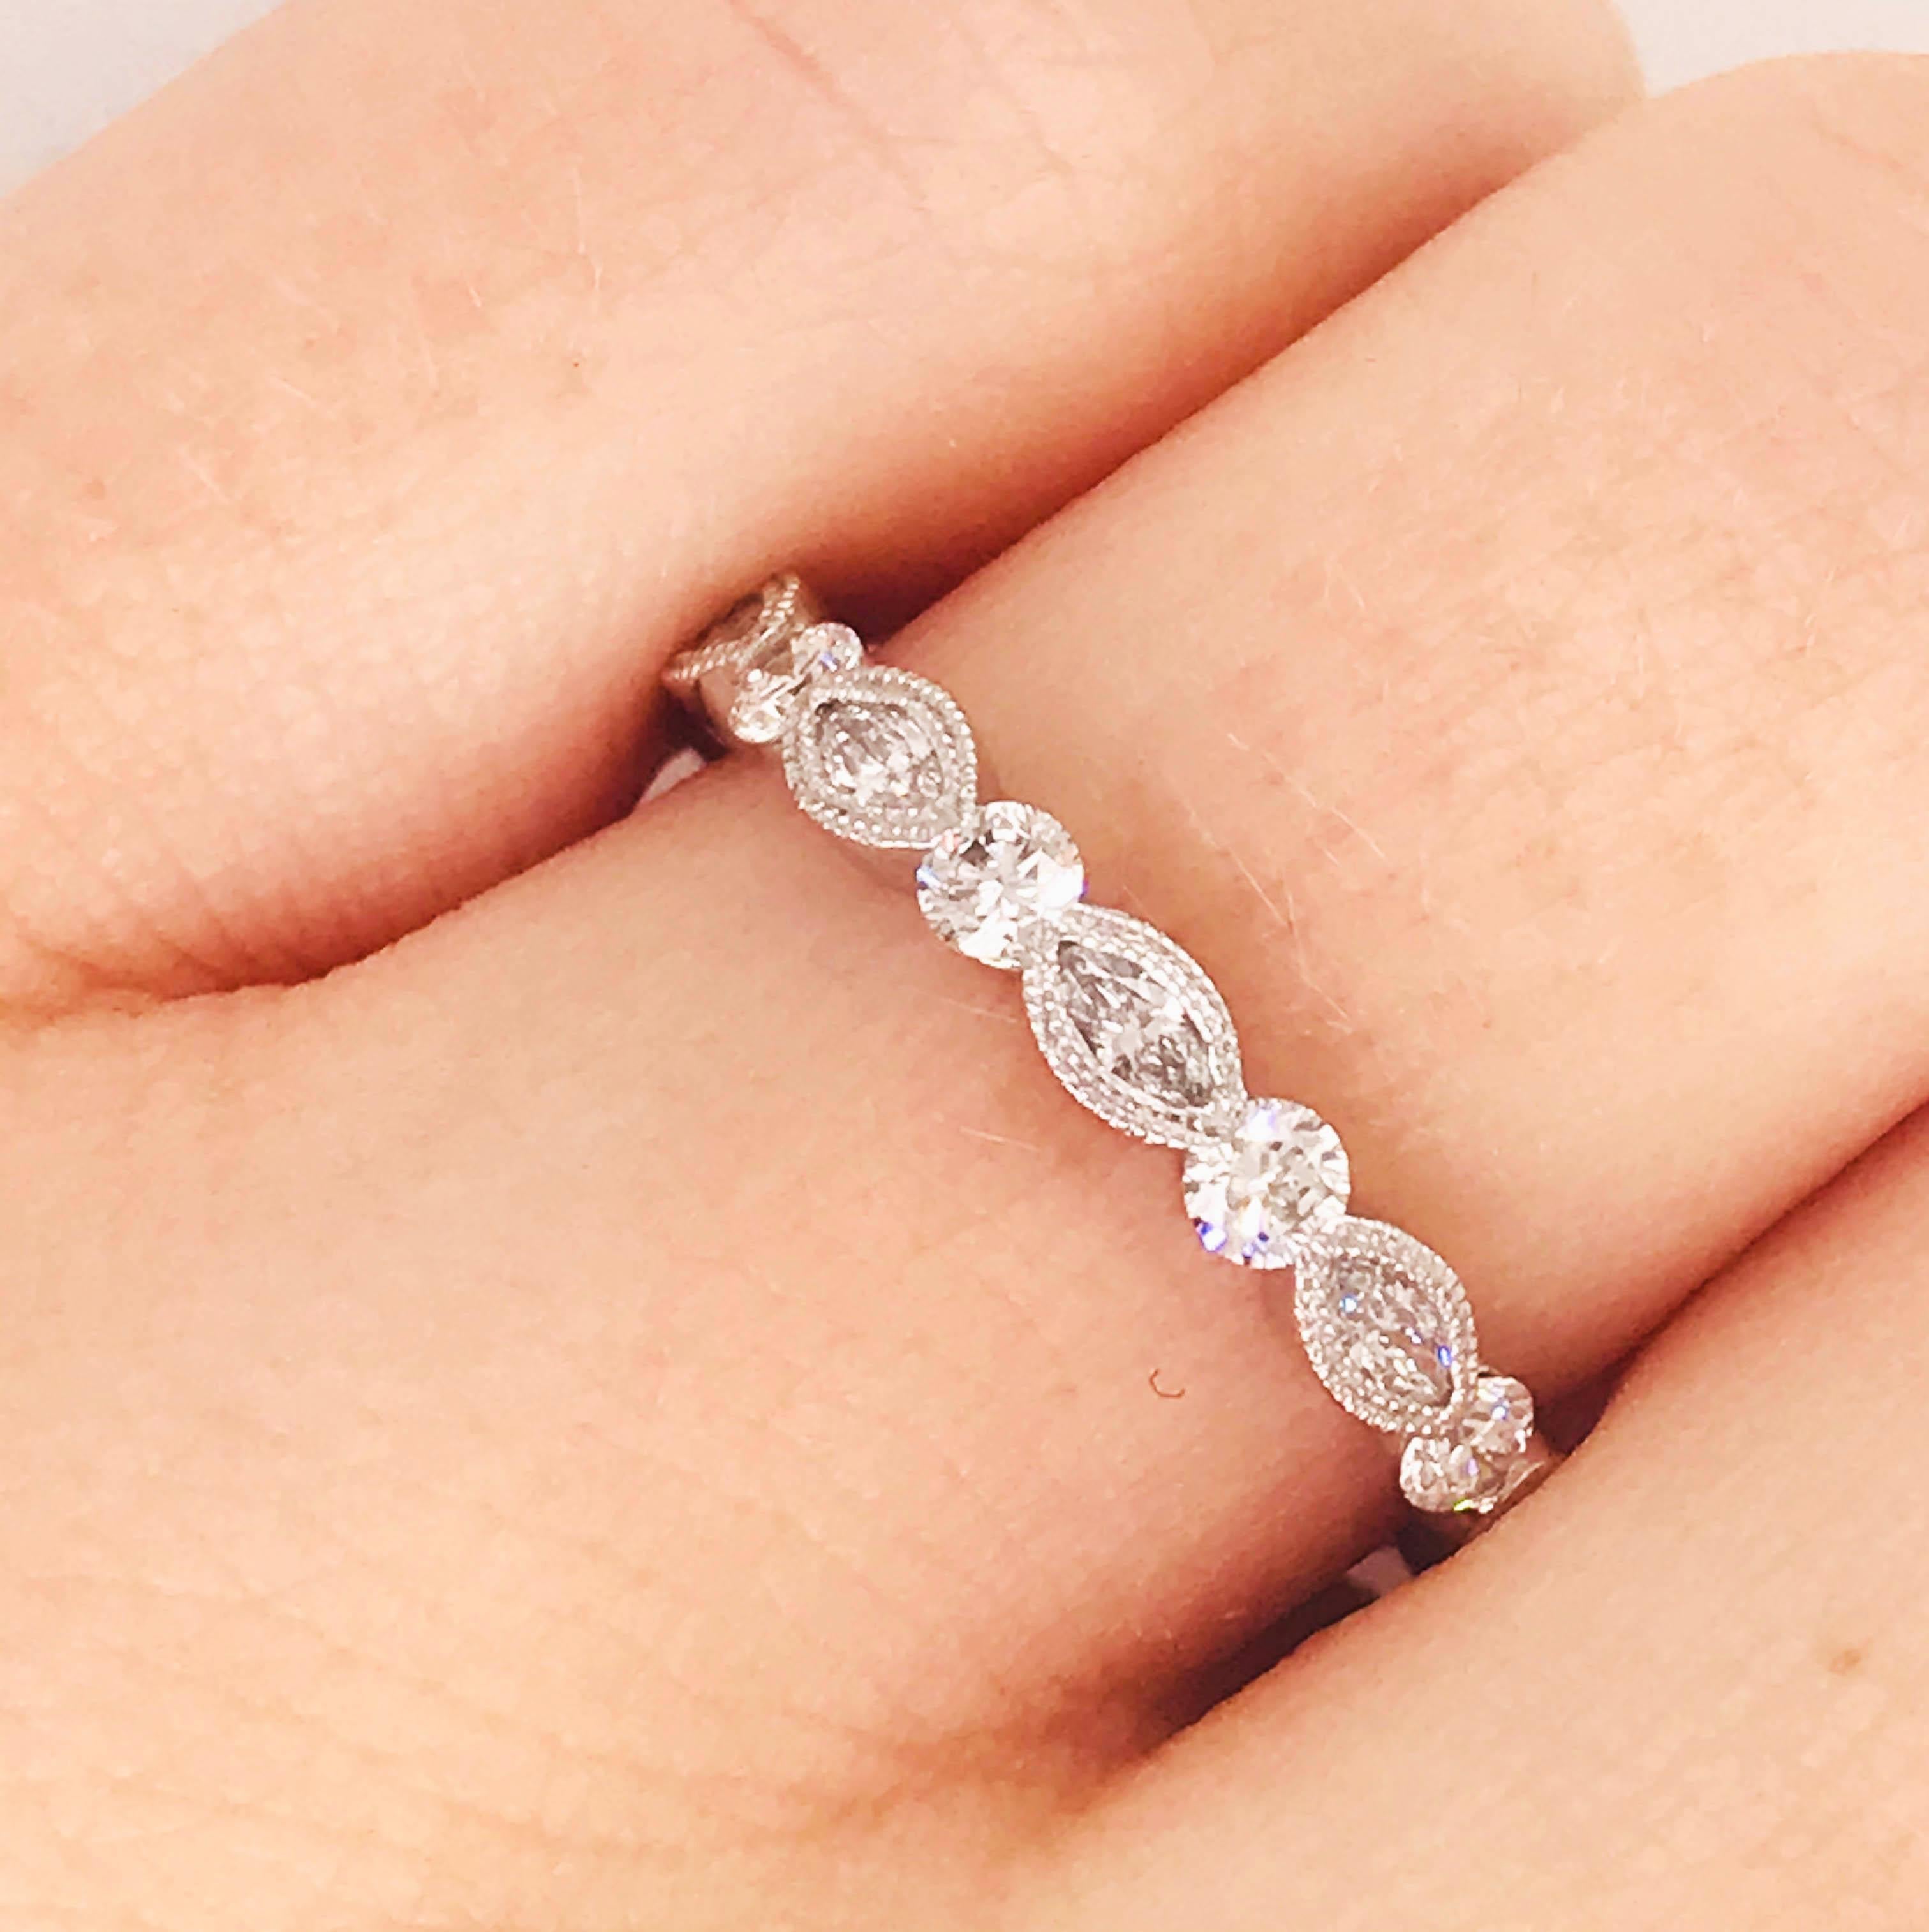 This is a bright 18k white gold 1/2 carat diamond band! With marquise diamonds set in a hand beaded bezel setting in between round brilliant diamonds. This band has a diamond pattern that goes 3/4 around the ring. The diamonds are top quality, F-G